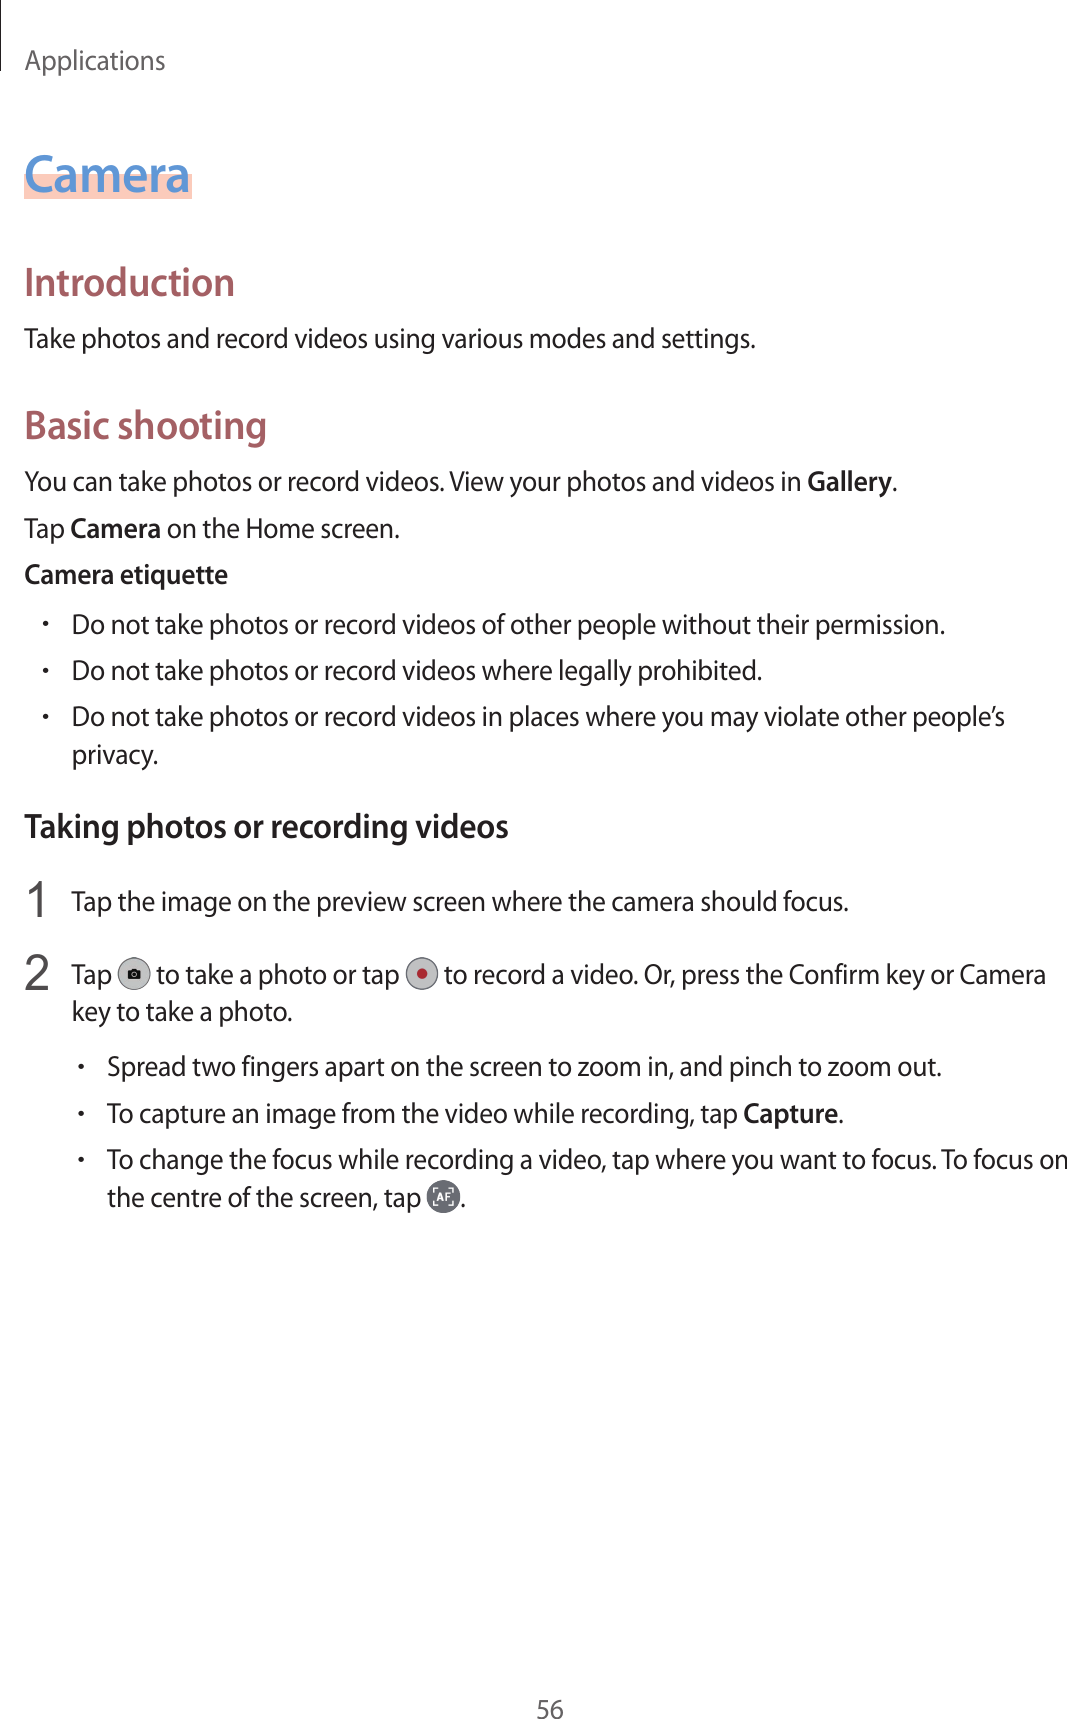 Applications56CameraIntroductionTake photos and record videos using various modes and settings.Basic shootingYou can take photos or record videos. View your photos and videos in Gallery.Tap Camera on the Home screen.Camera etiquette•Do not take photos or record videos of other people without their permission.•Do not take photos or record videos where legally prohibited.•Do not take photos or record videos in places where you may violate other people’s privacy.Taking photos or recording videos1  Tap the image on the preview screen where the camera should focus.2  Tap   to take a photo or tap   to record a video. Or, press the Confirm key or Camera key to take a photo.•Spread two fingers apart on the screen to zoom in, and pinch to zoom out.•To capture an image from the video while recording, tap Capture.•To change the focus while recording a video, tap where you want to focus. To focus on the centre of the screen, tap  .